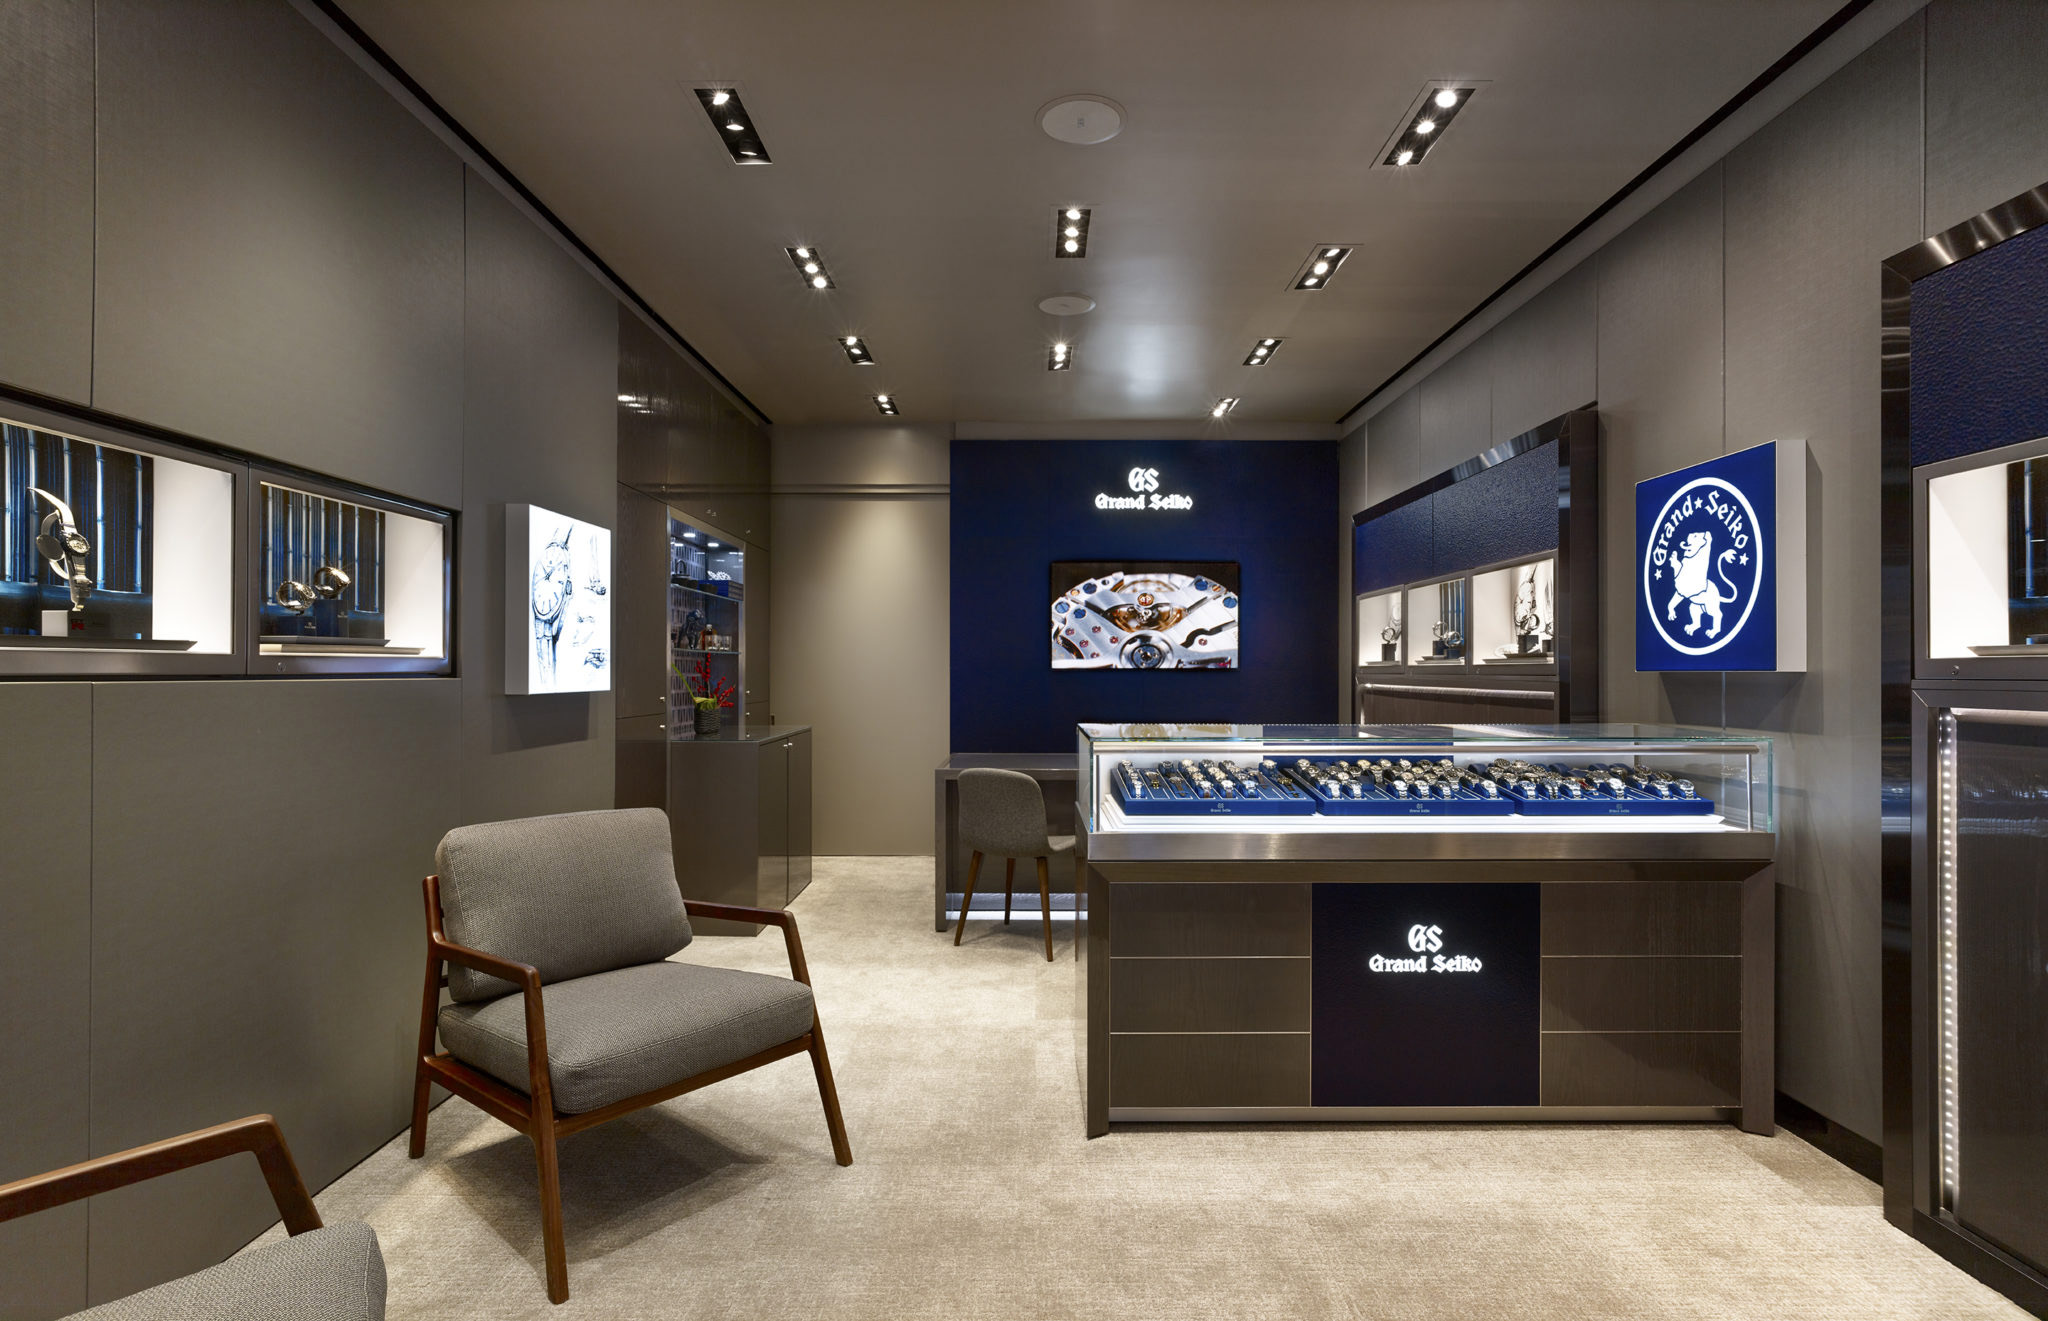 Opening of Grand Seiko's Manhattan mega store scheduled for the Fall